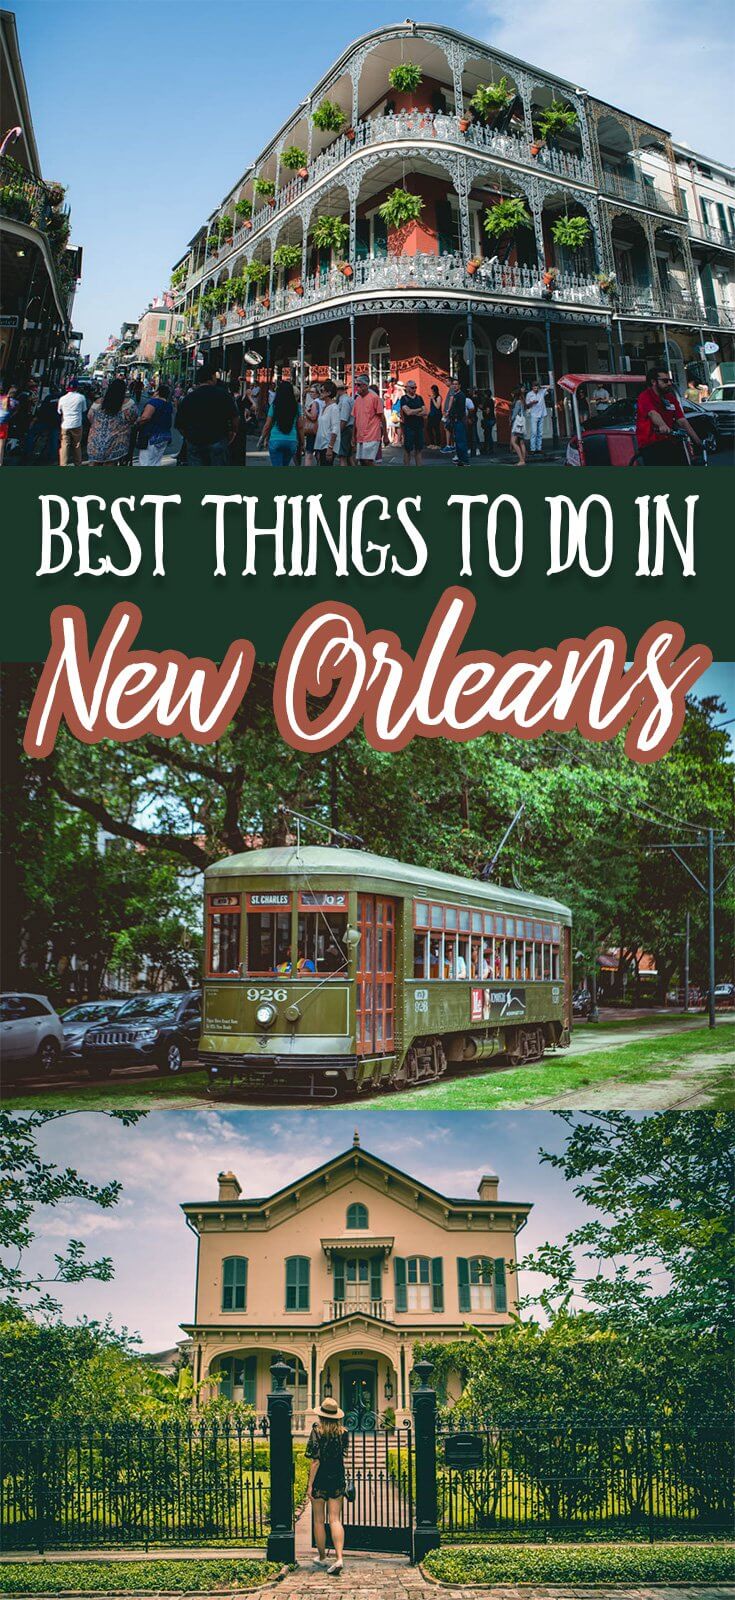 Best things to do in New Orleans